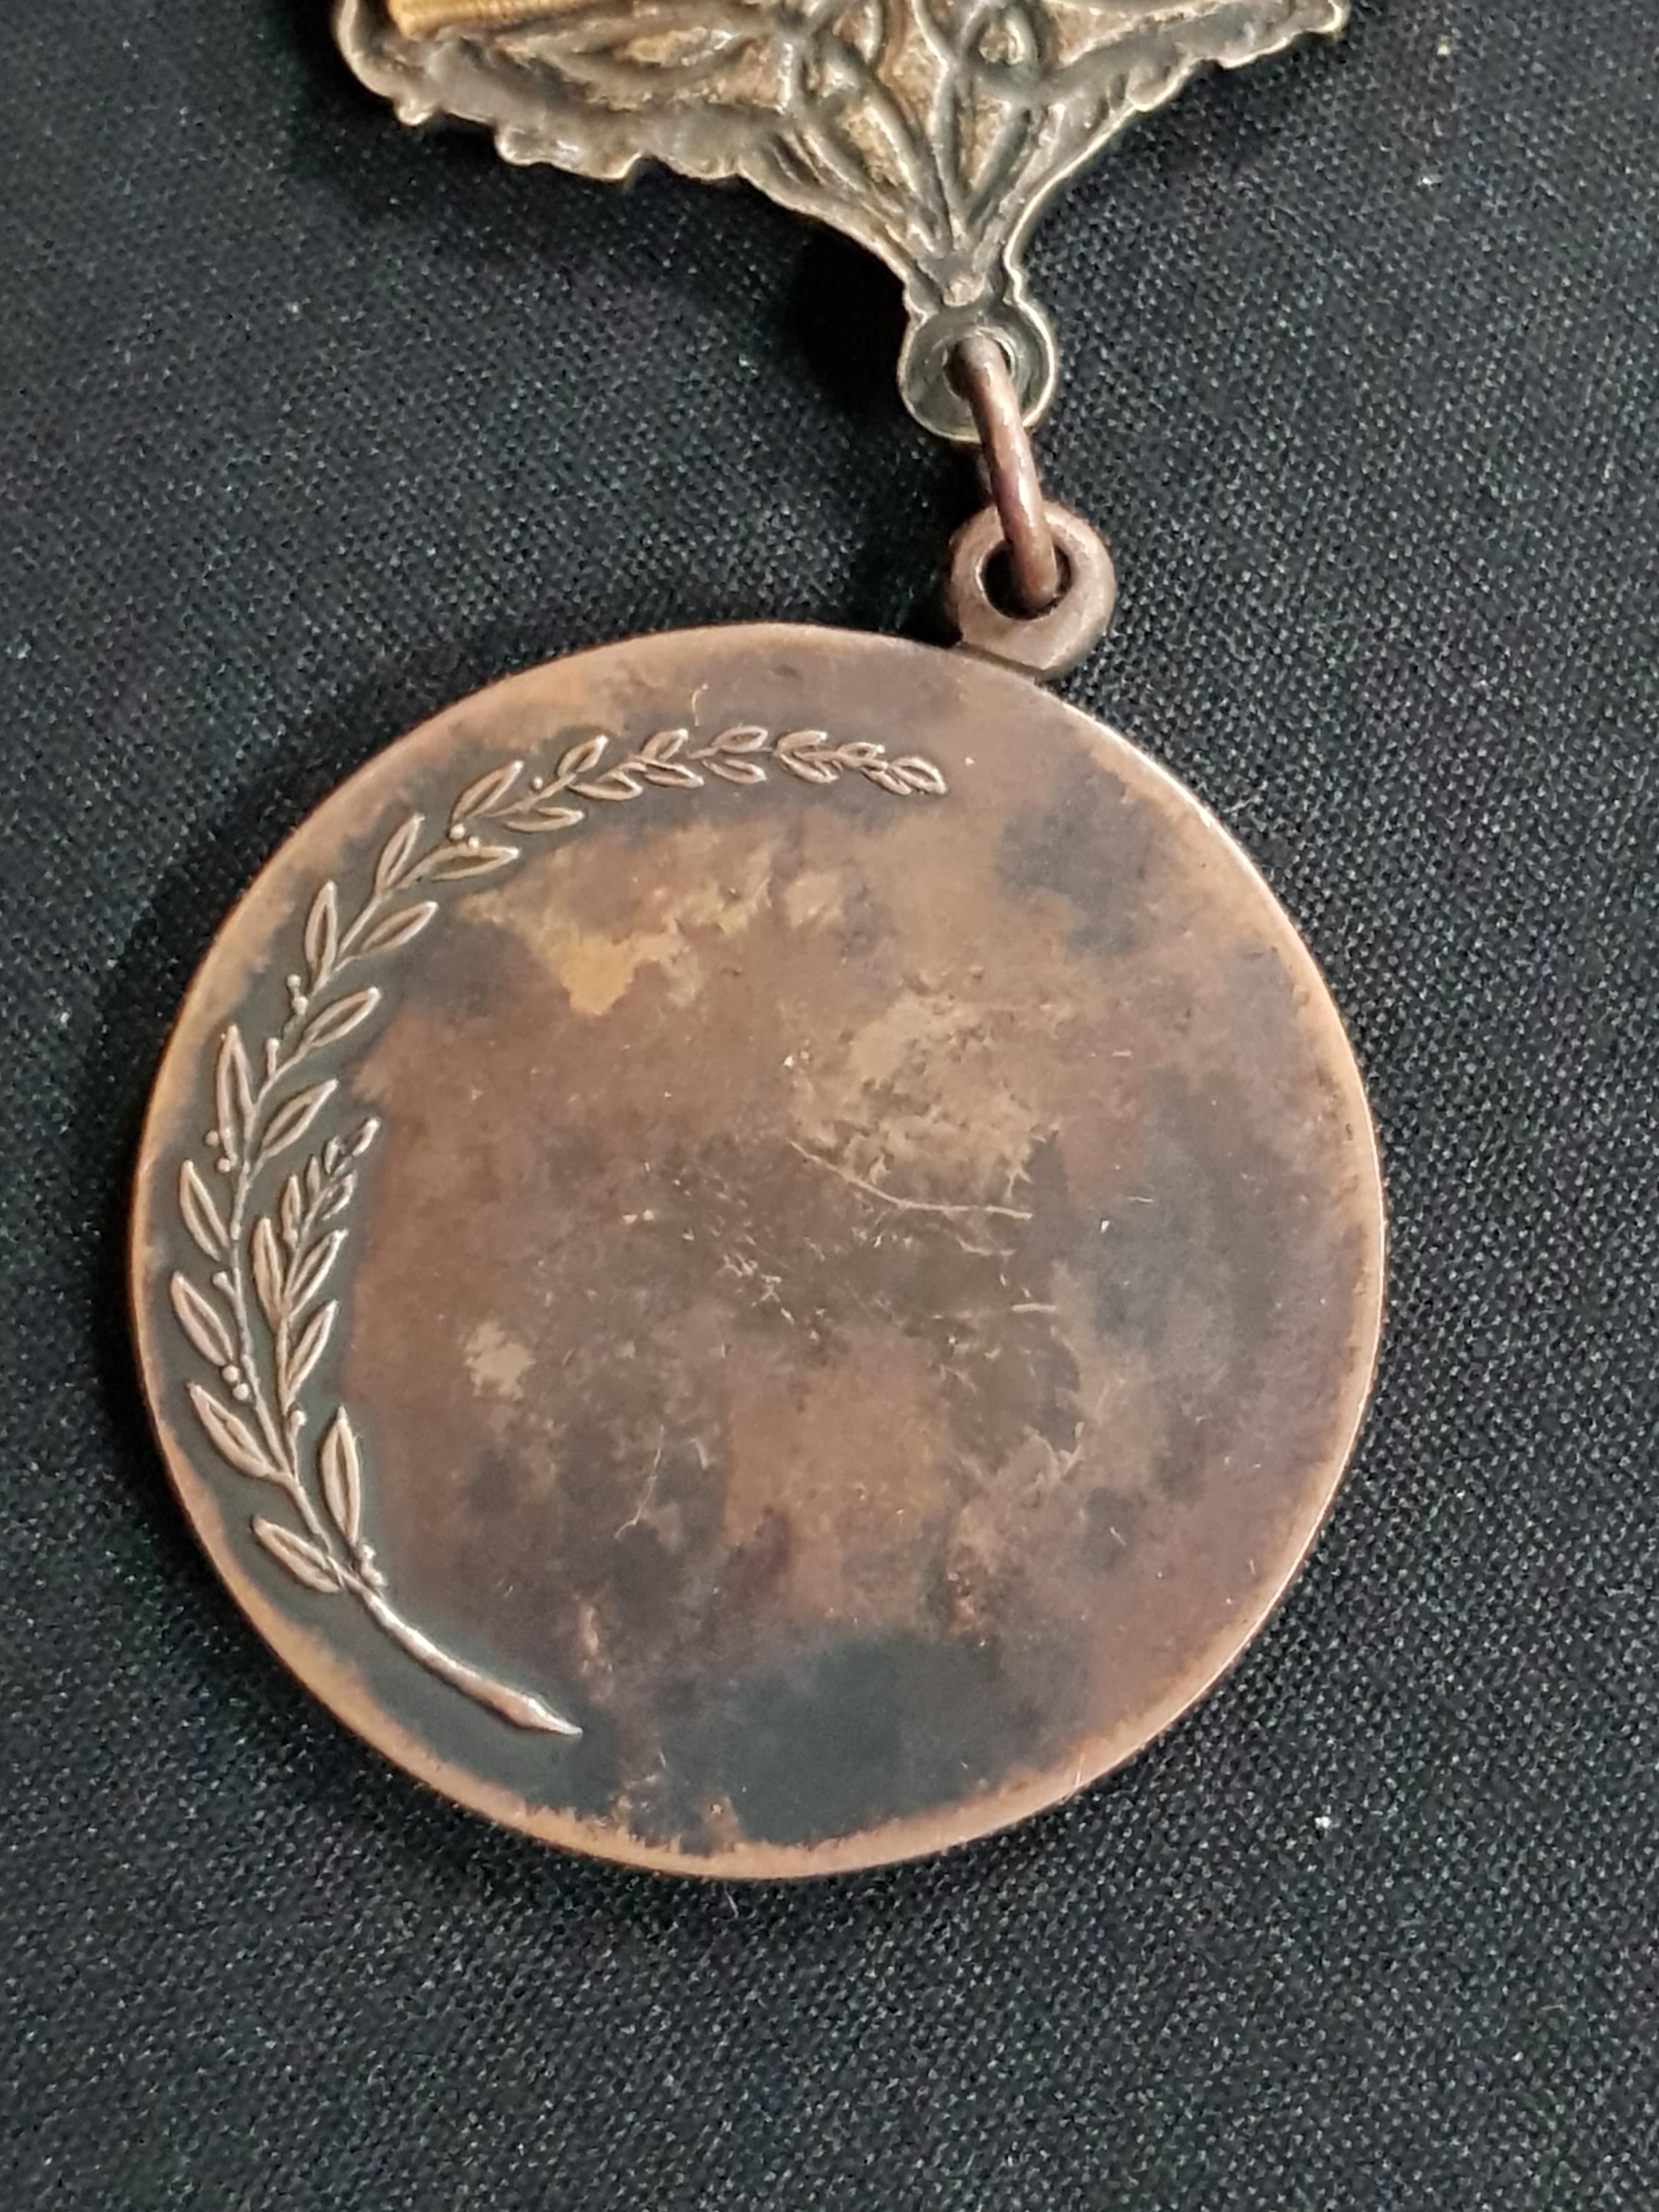 SET OF 3 MEDALS BELONGING TO H.G MCDONALD ACCOMPANIED BY THE LEATHER POUCH THEY ARRIVED IN AND A - Image 5 of 5